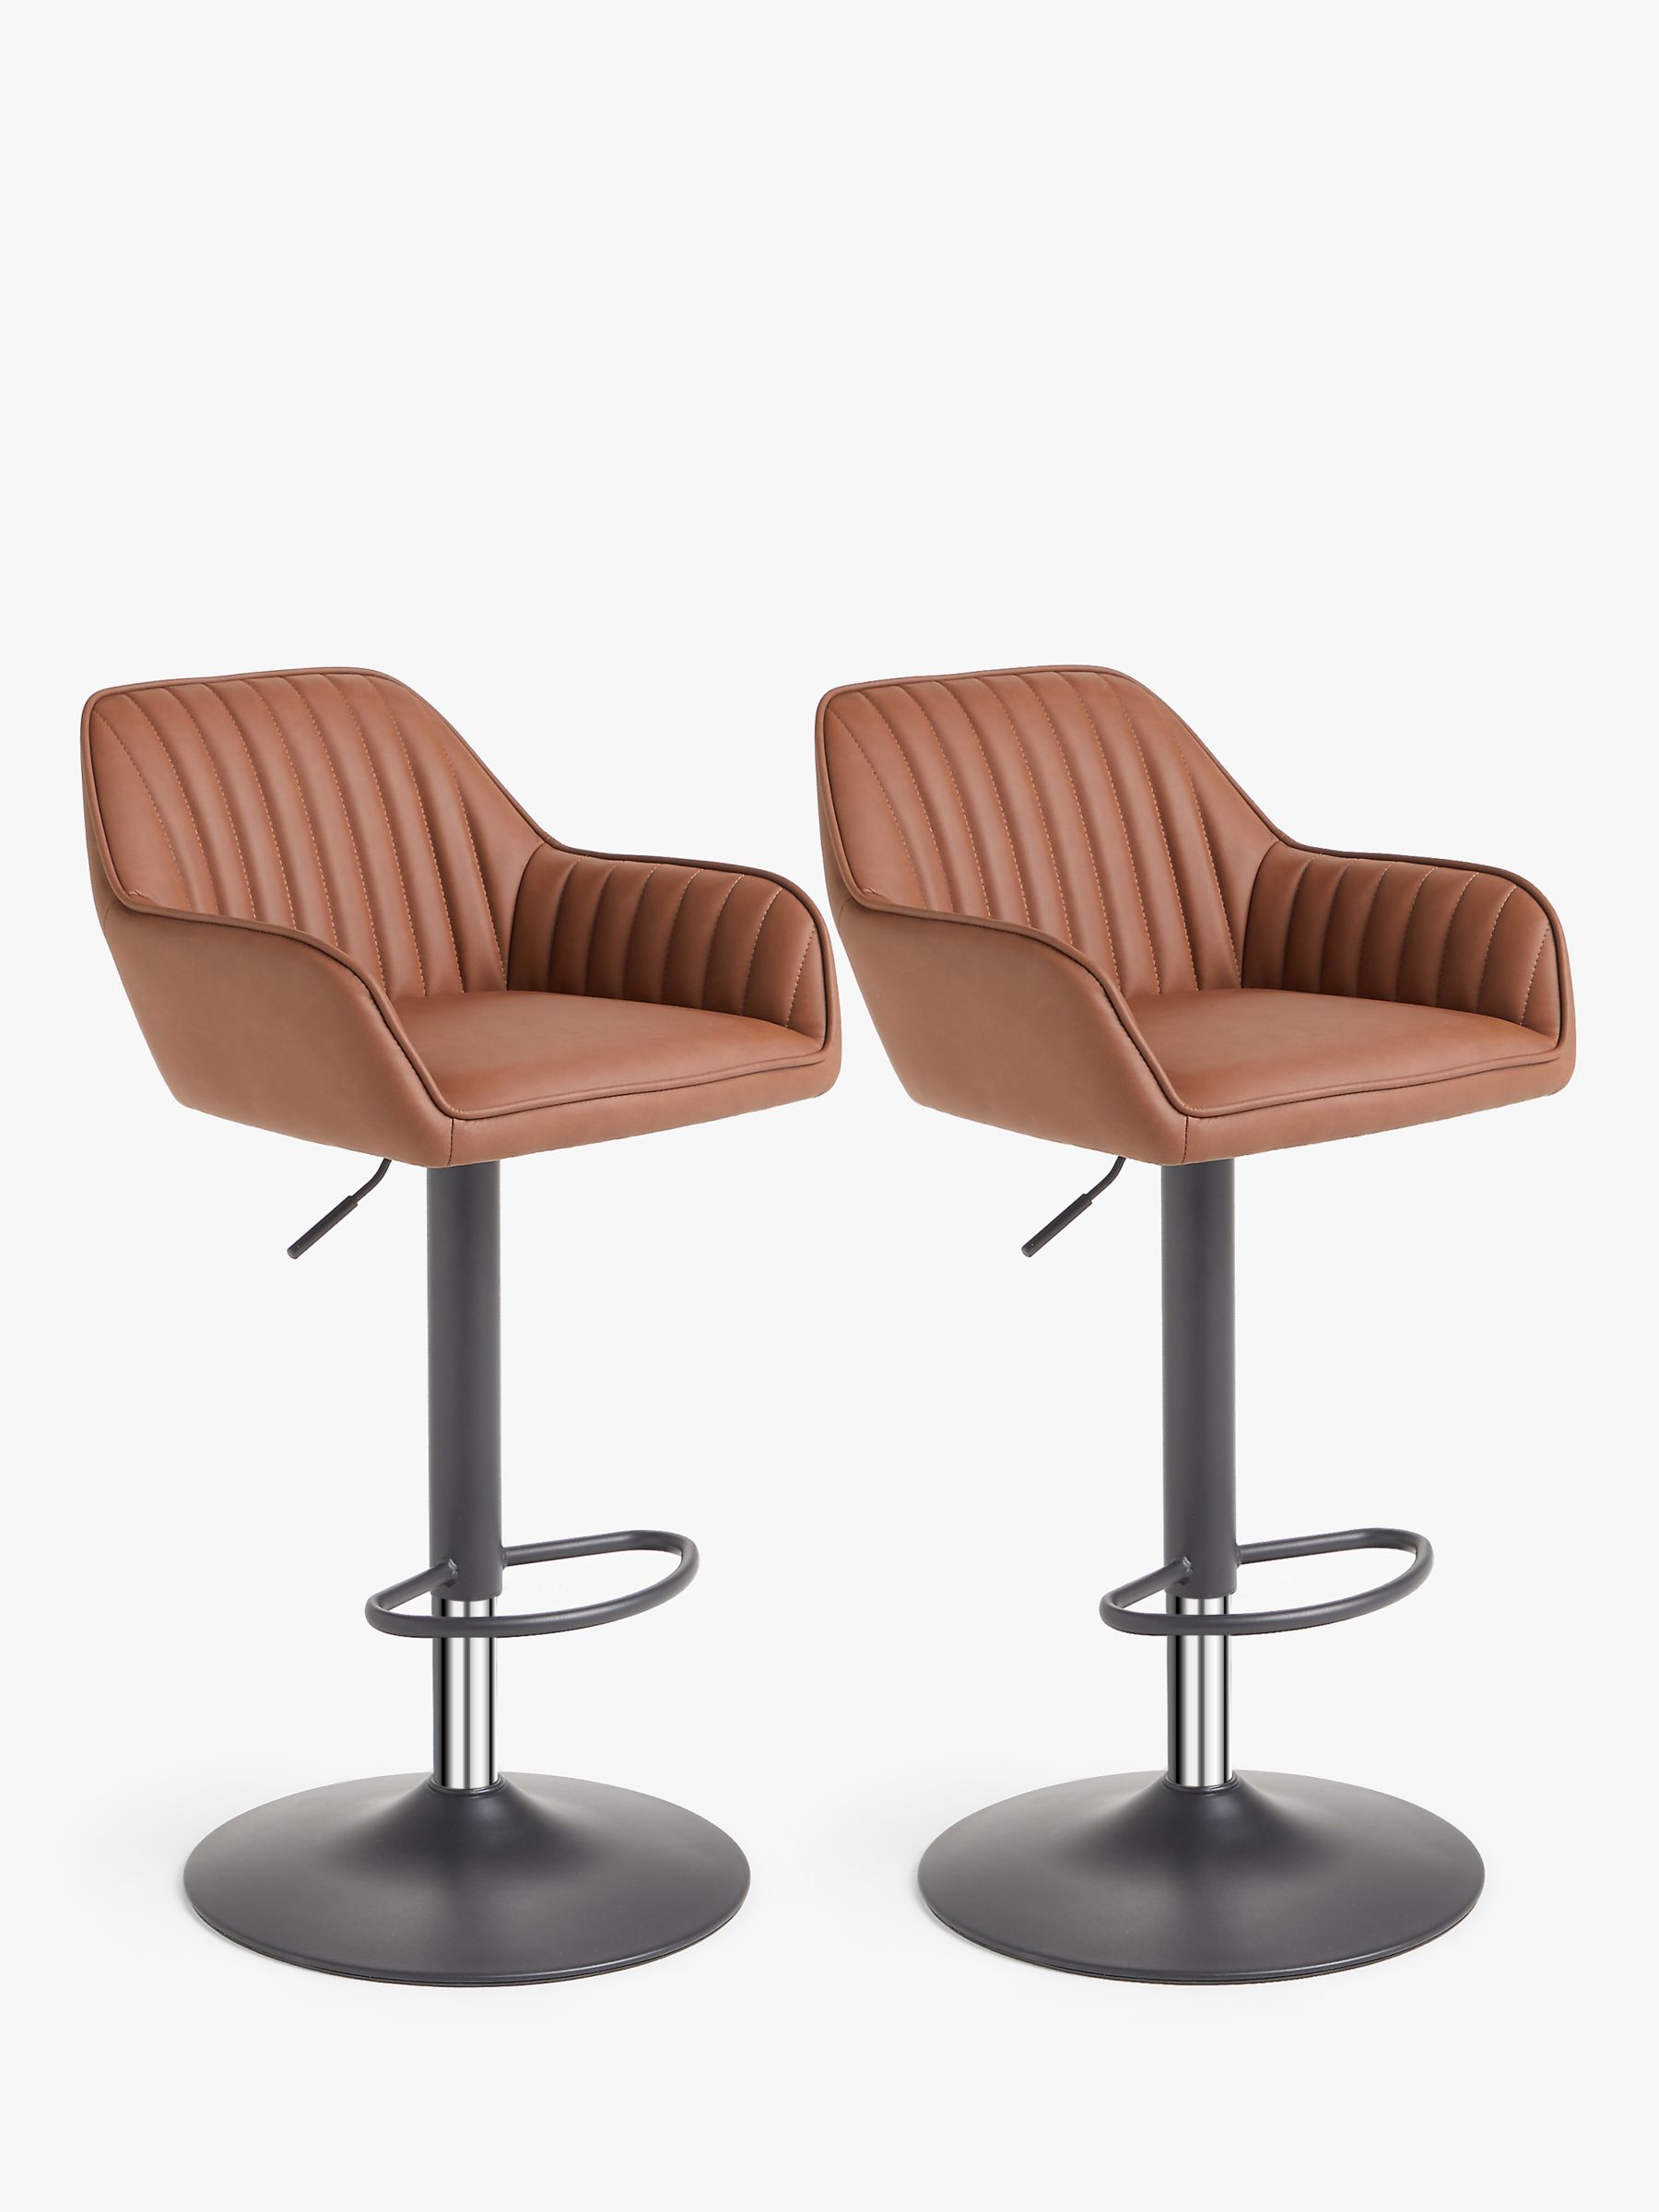 Bar Chairs Stools John Lewis Partners, Tan Leather Bar Stools With Backs And Arms